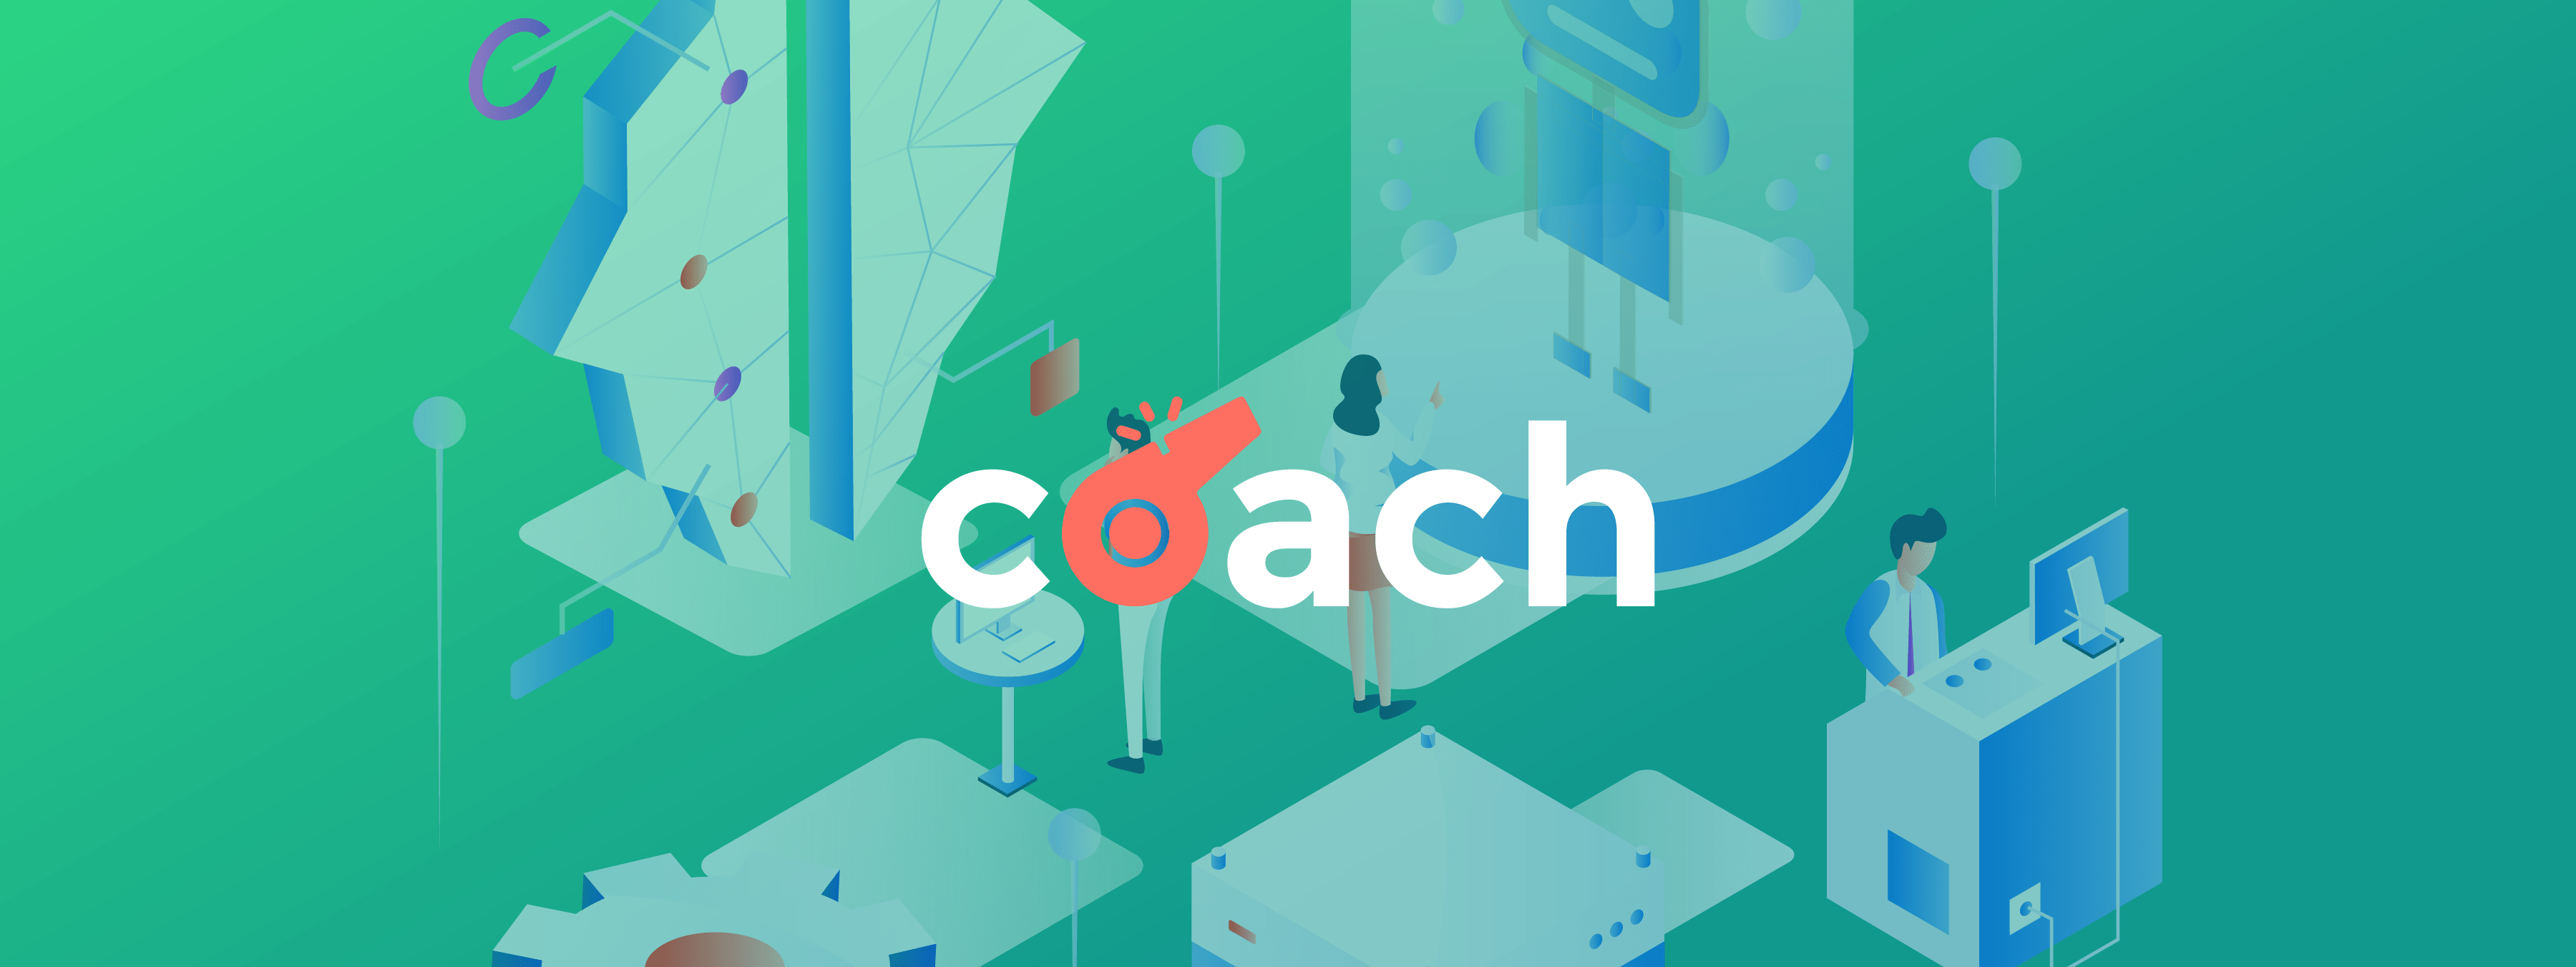 Empower your IT staff with Coach: our cloud mentorship service